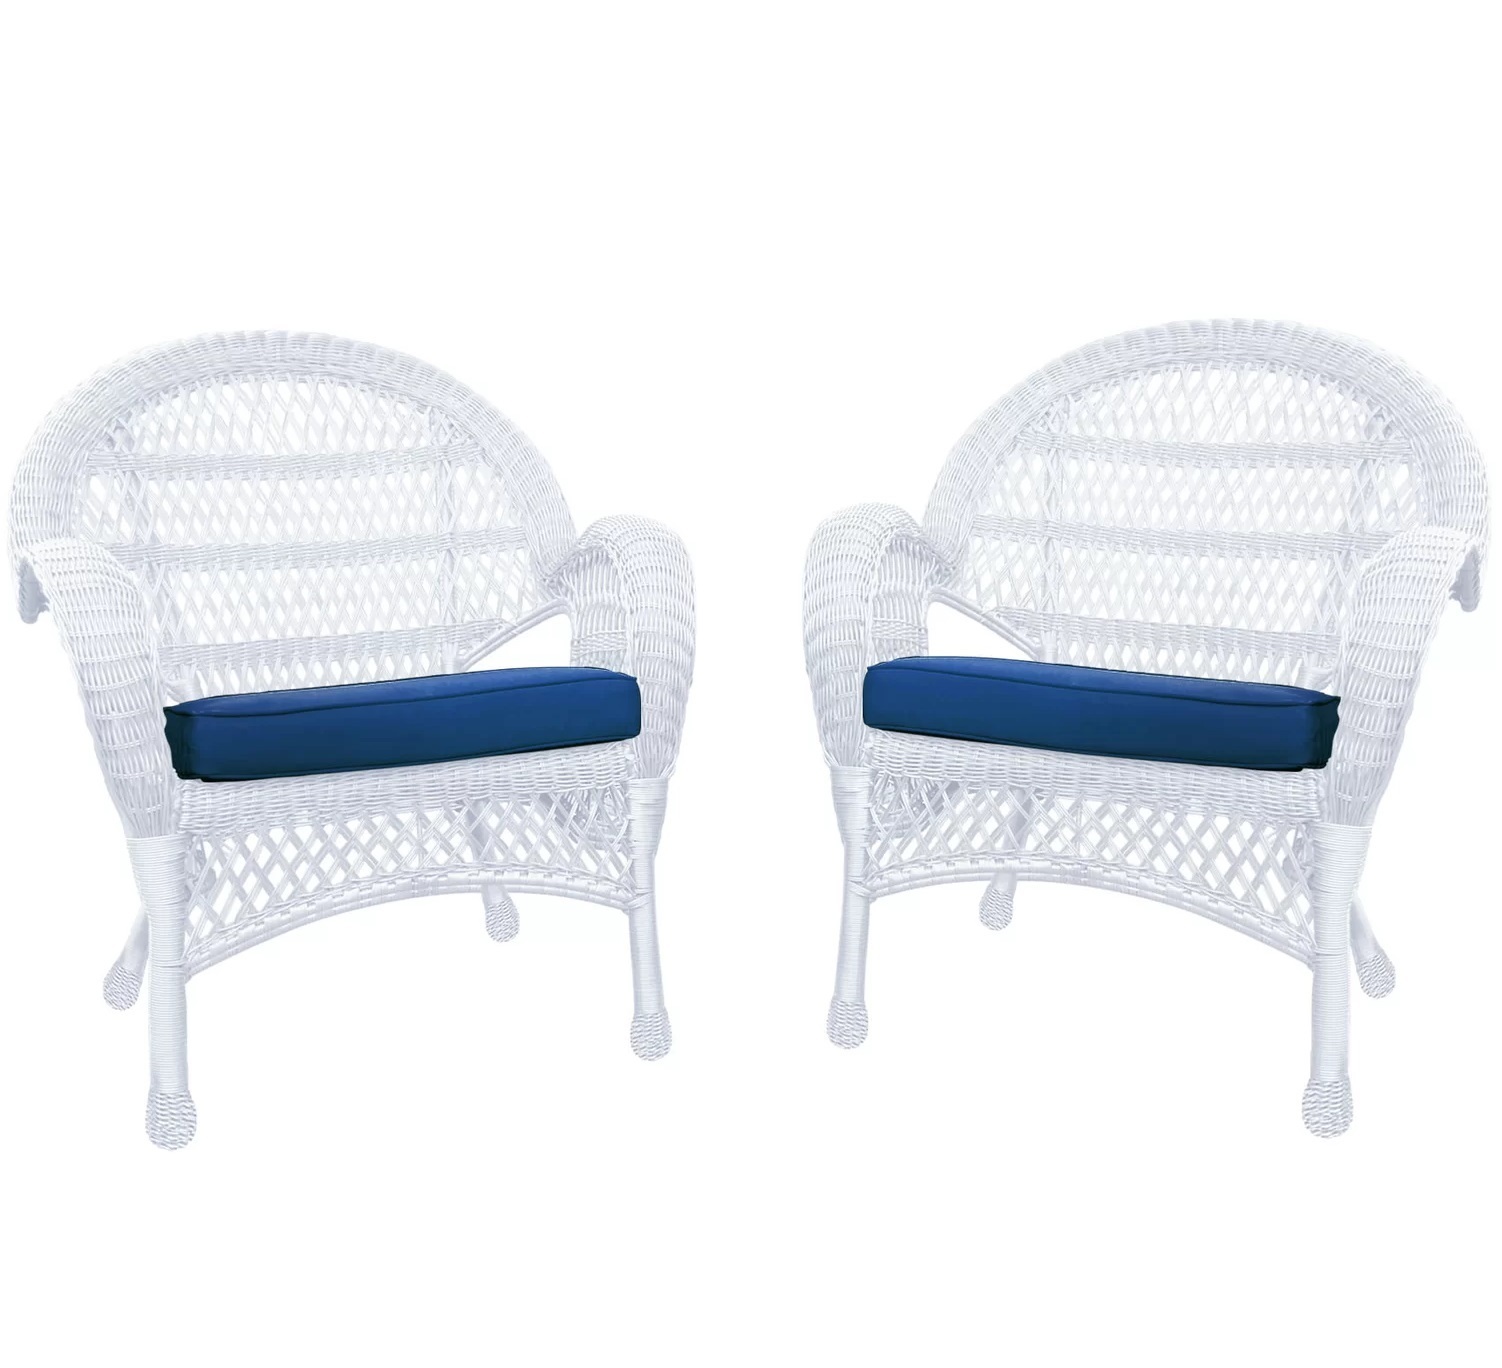 Set of Two Outdoor Wicker Armchairs